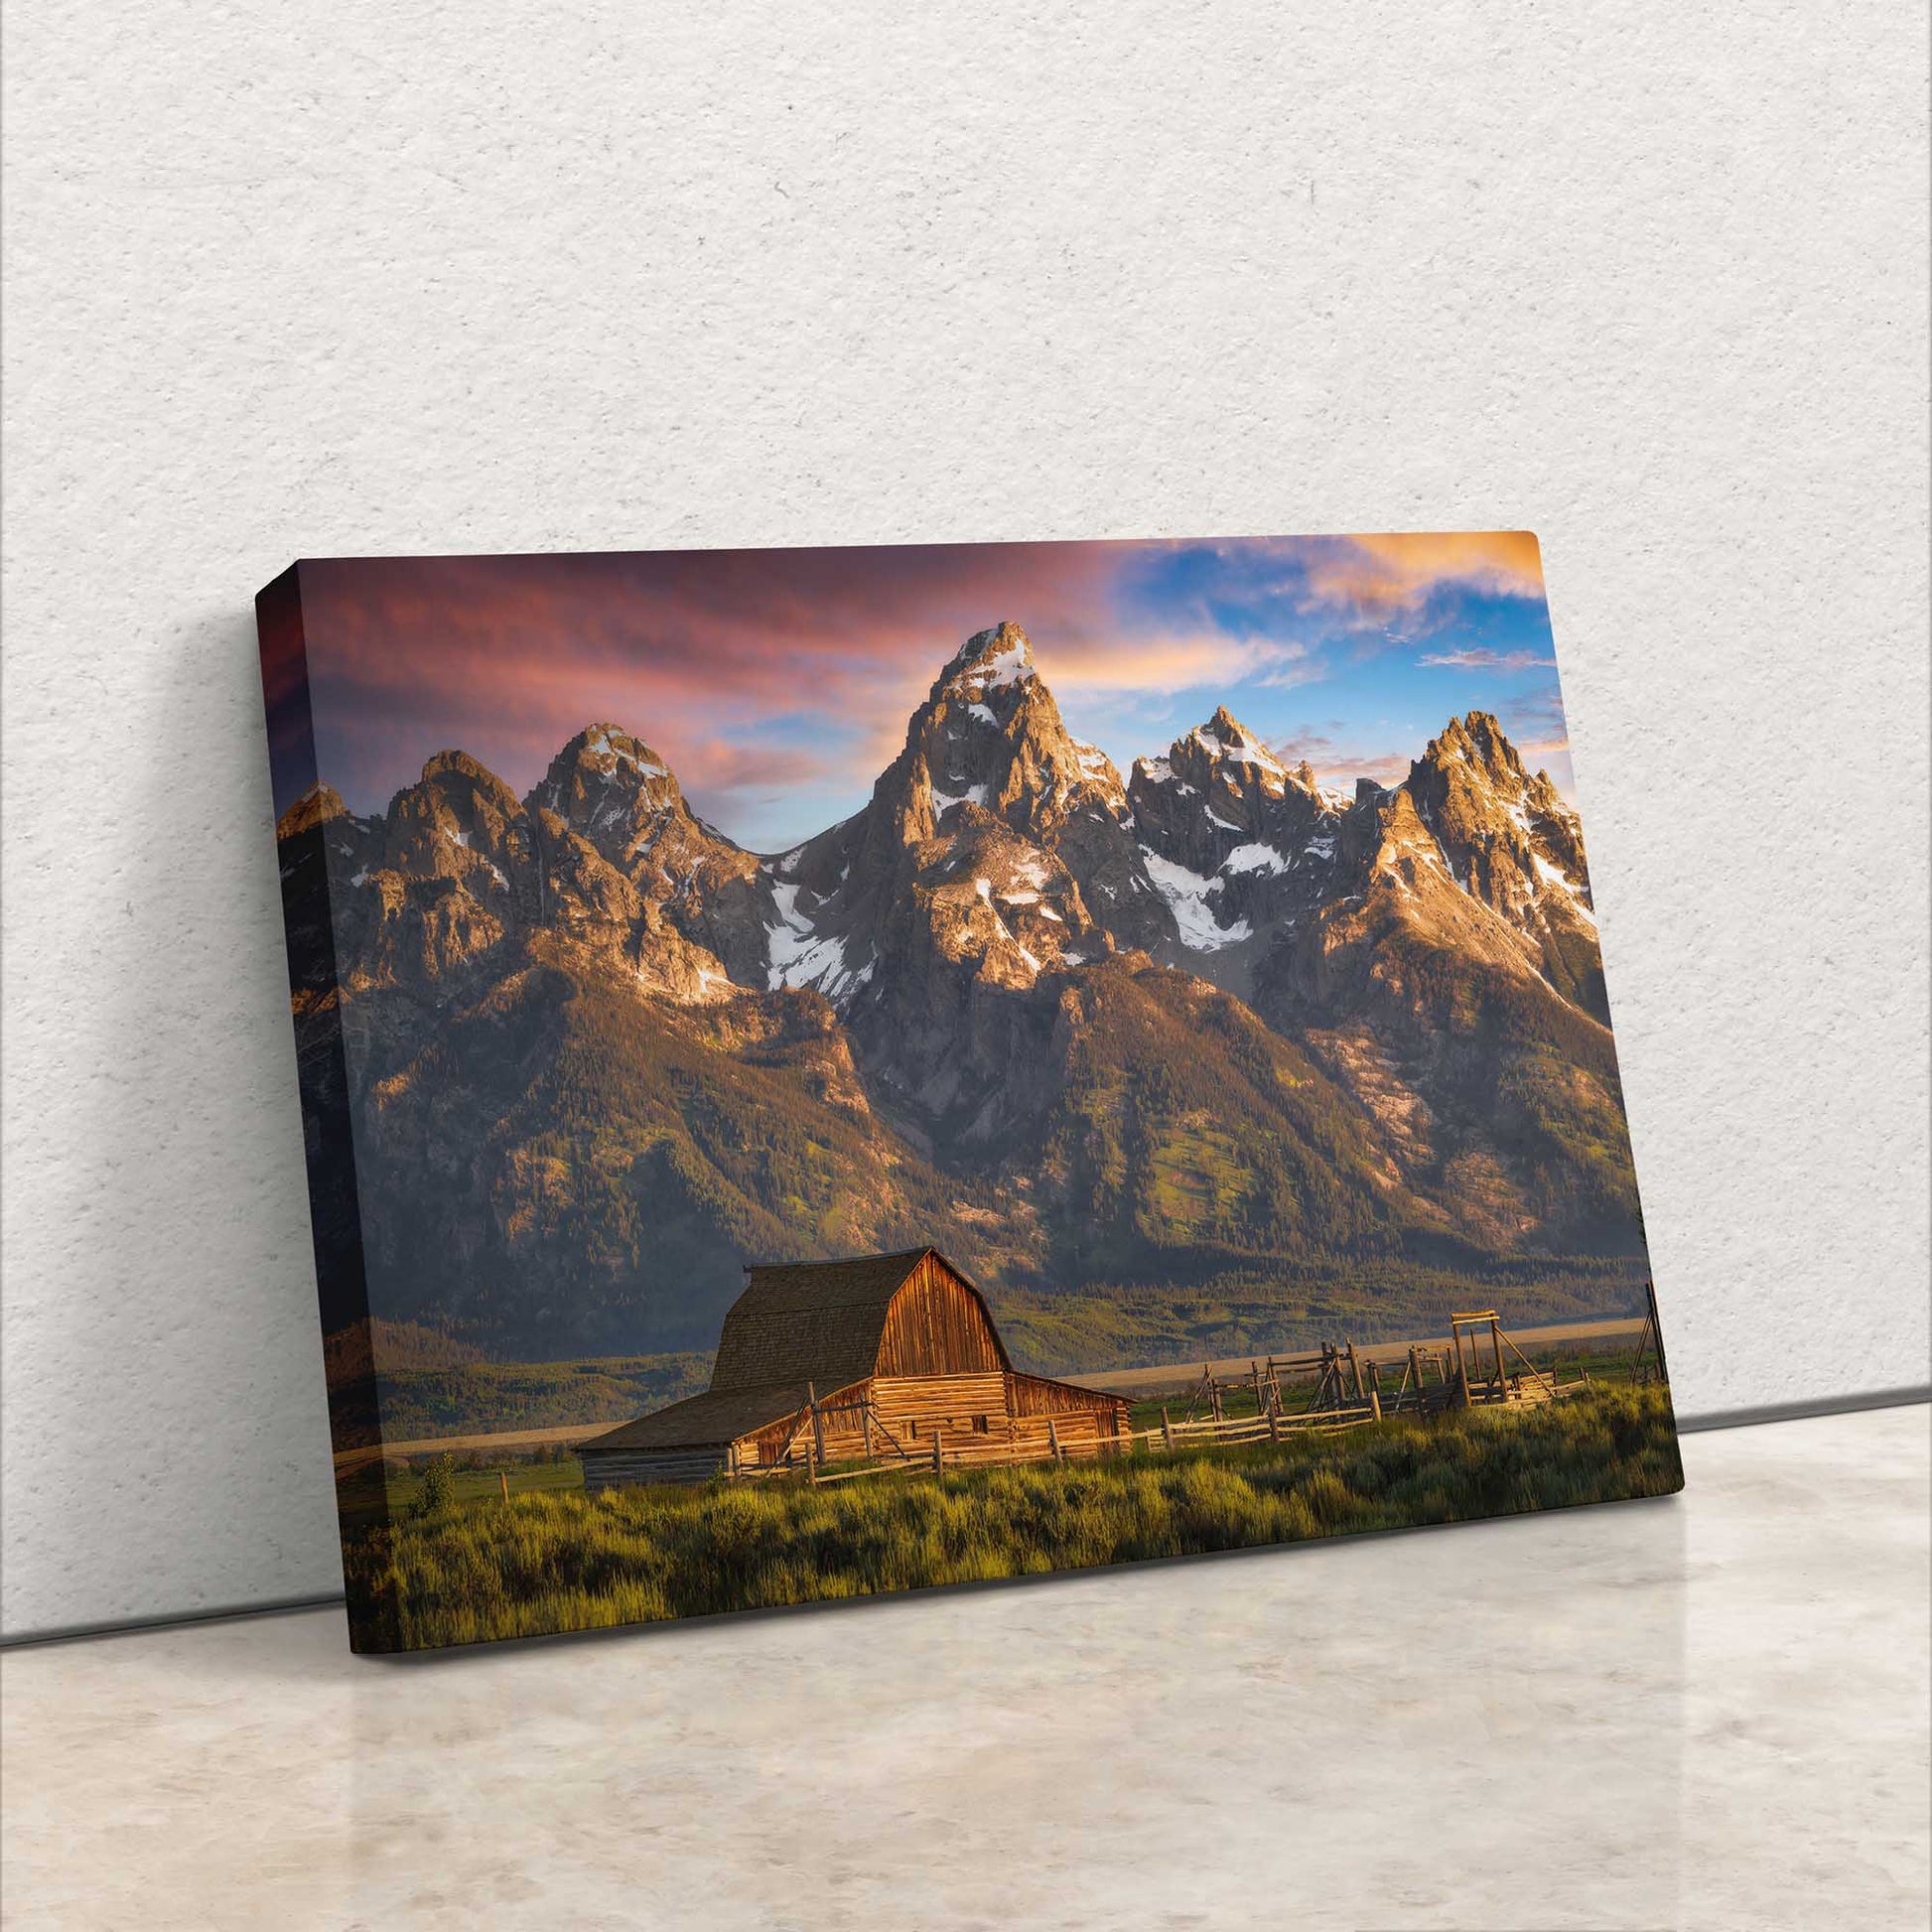 Side view of a canvas wall art depicting the John Moulton Homestead against the Teton Mountains, highlighting the rich colors of sunrise at Grand Teton National Park.